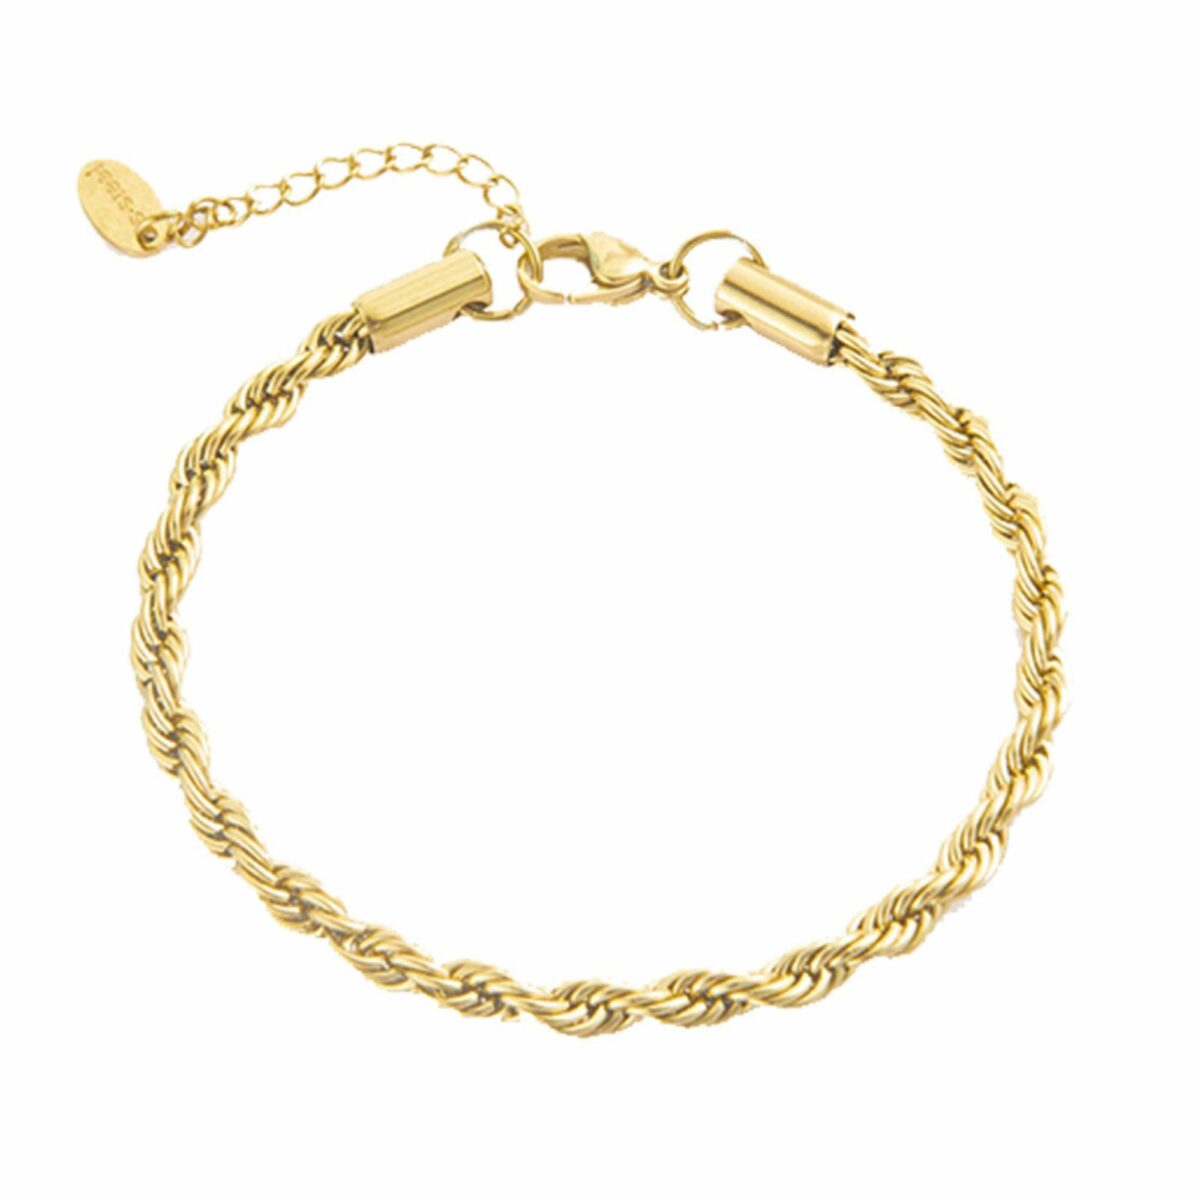 https://m.clubbella.co/product/14k-gold-plated-rope-chain-bracelet/ 1674978402637